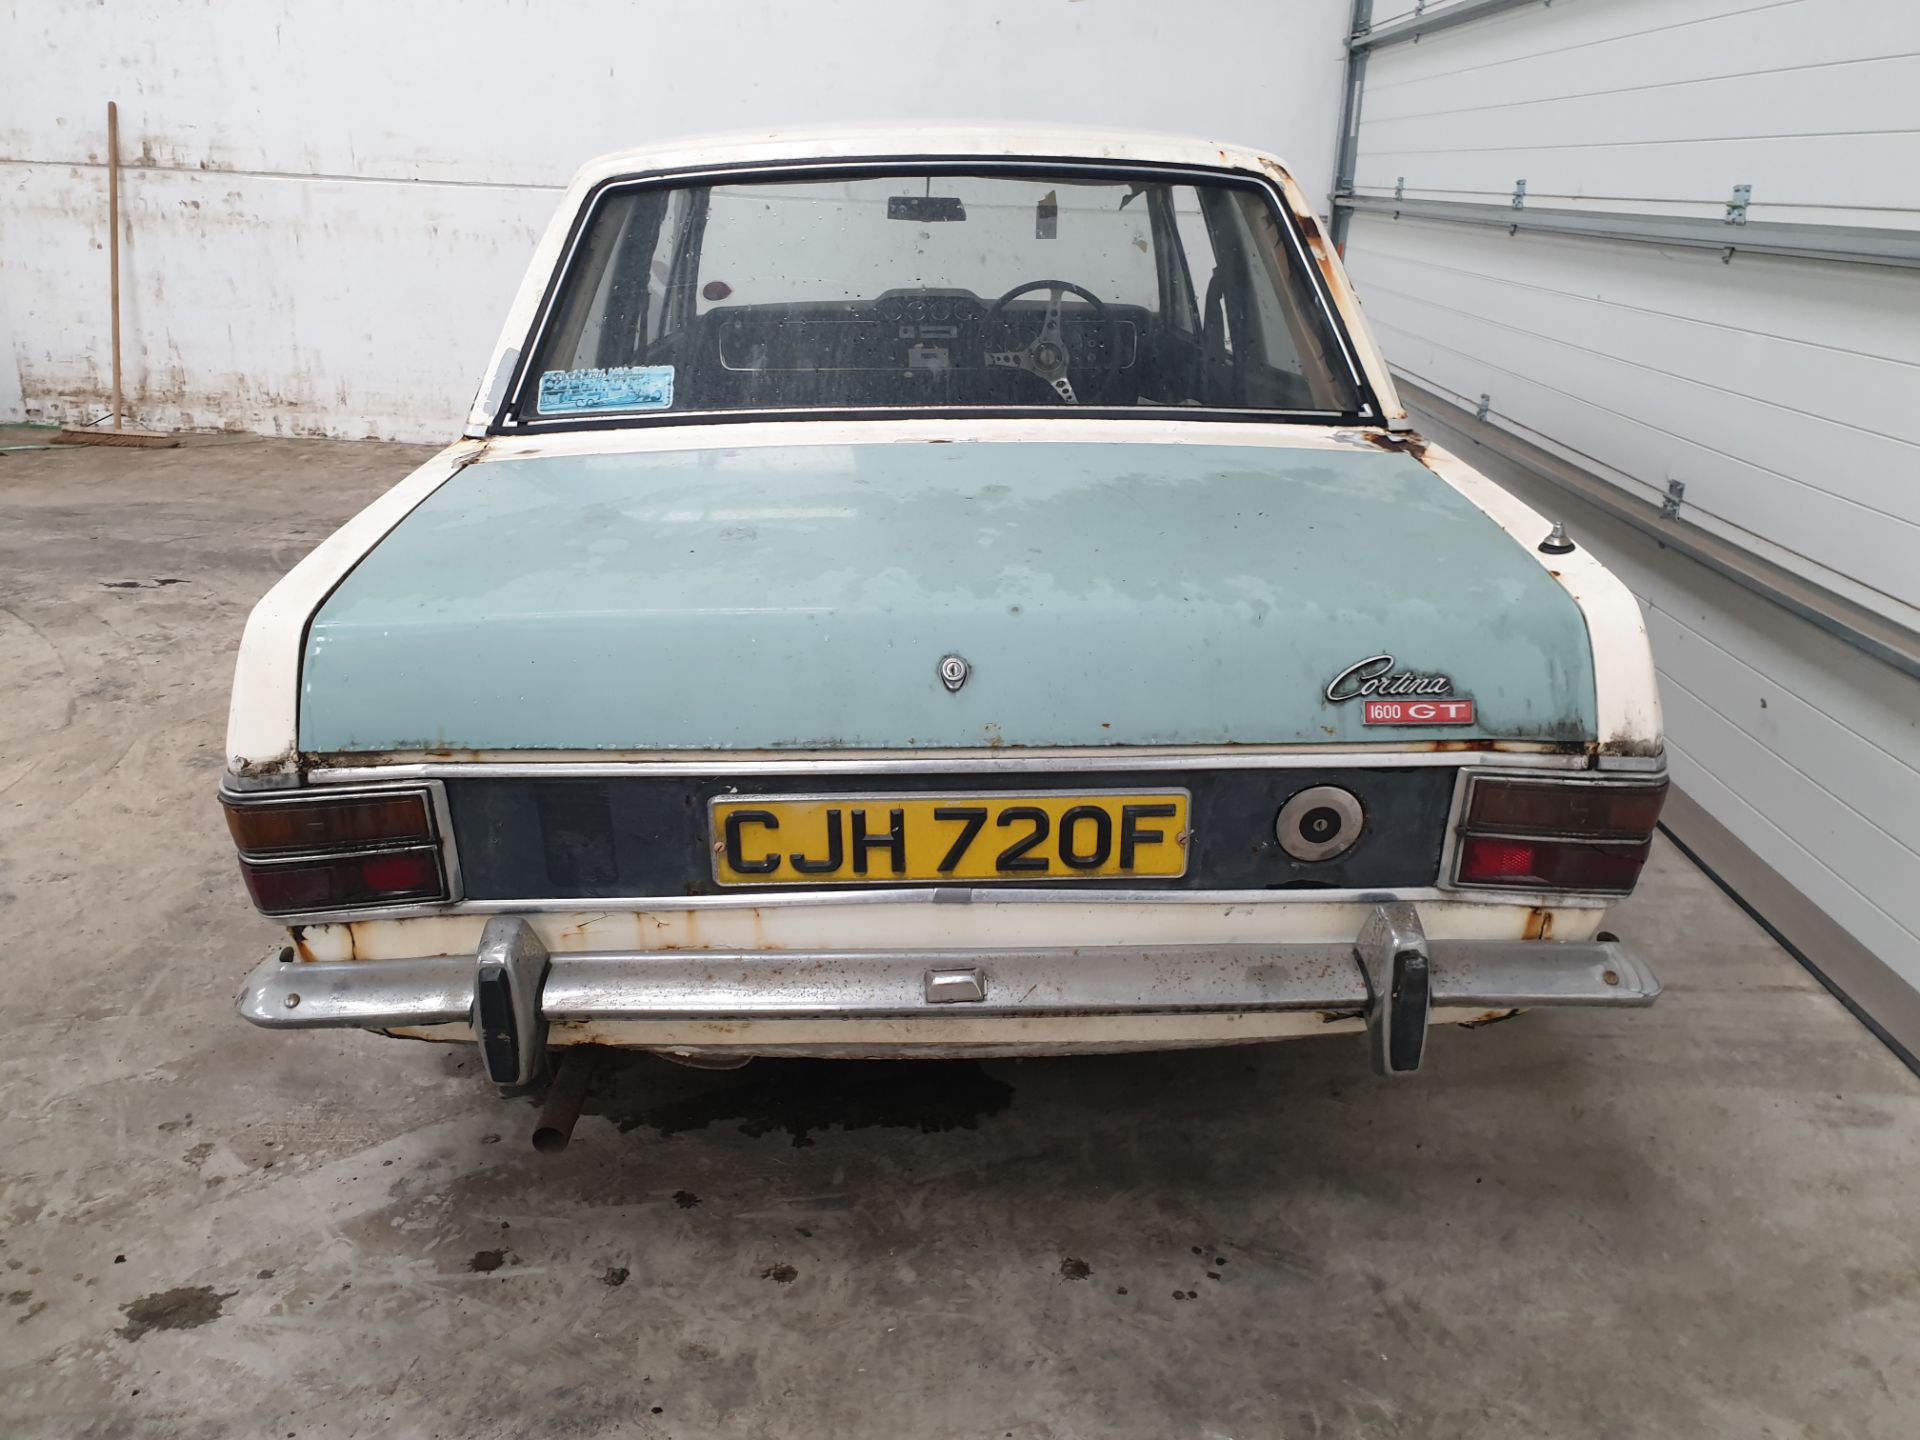 Ford Cortina 1600 GT 2 dr - Image 4 of 11